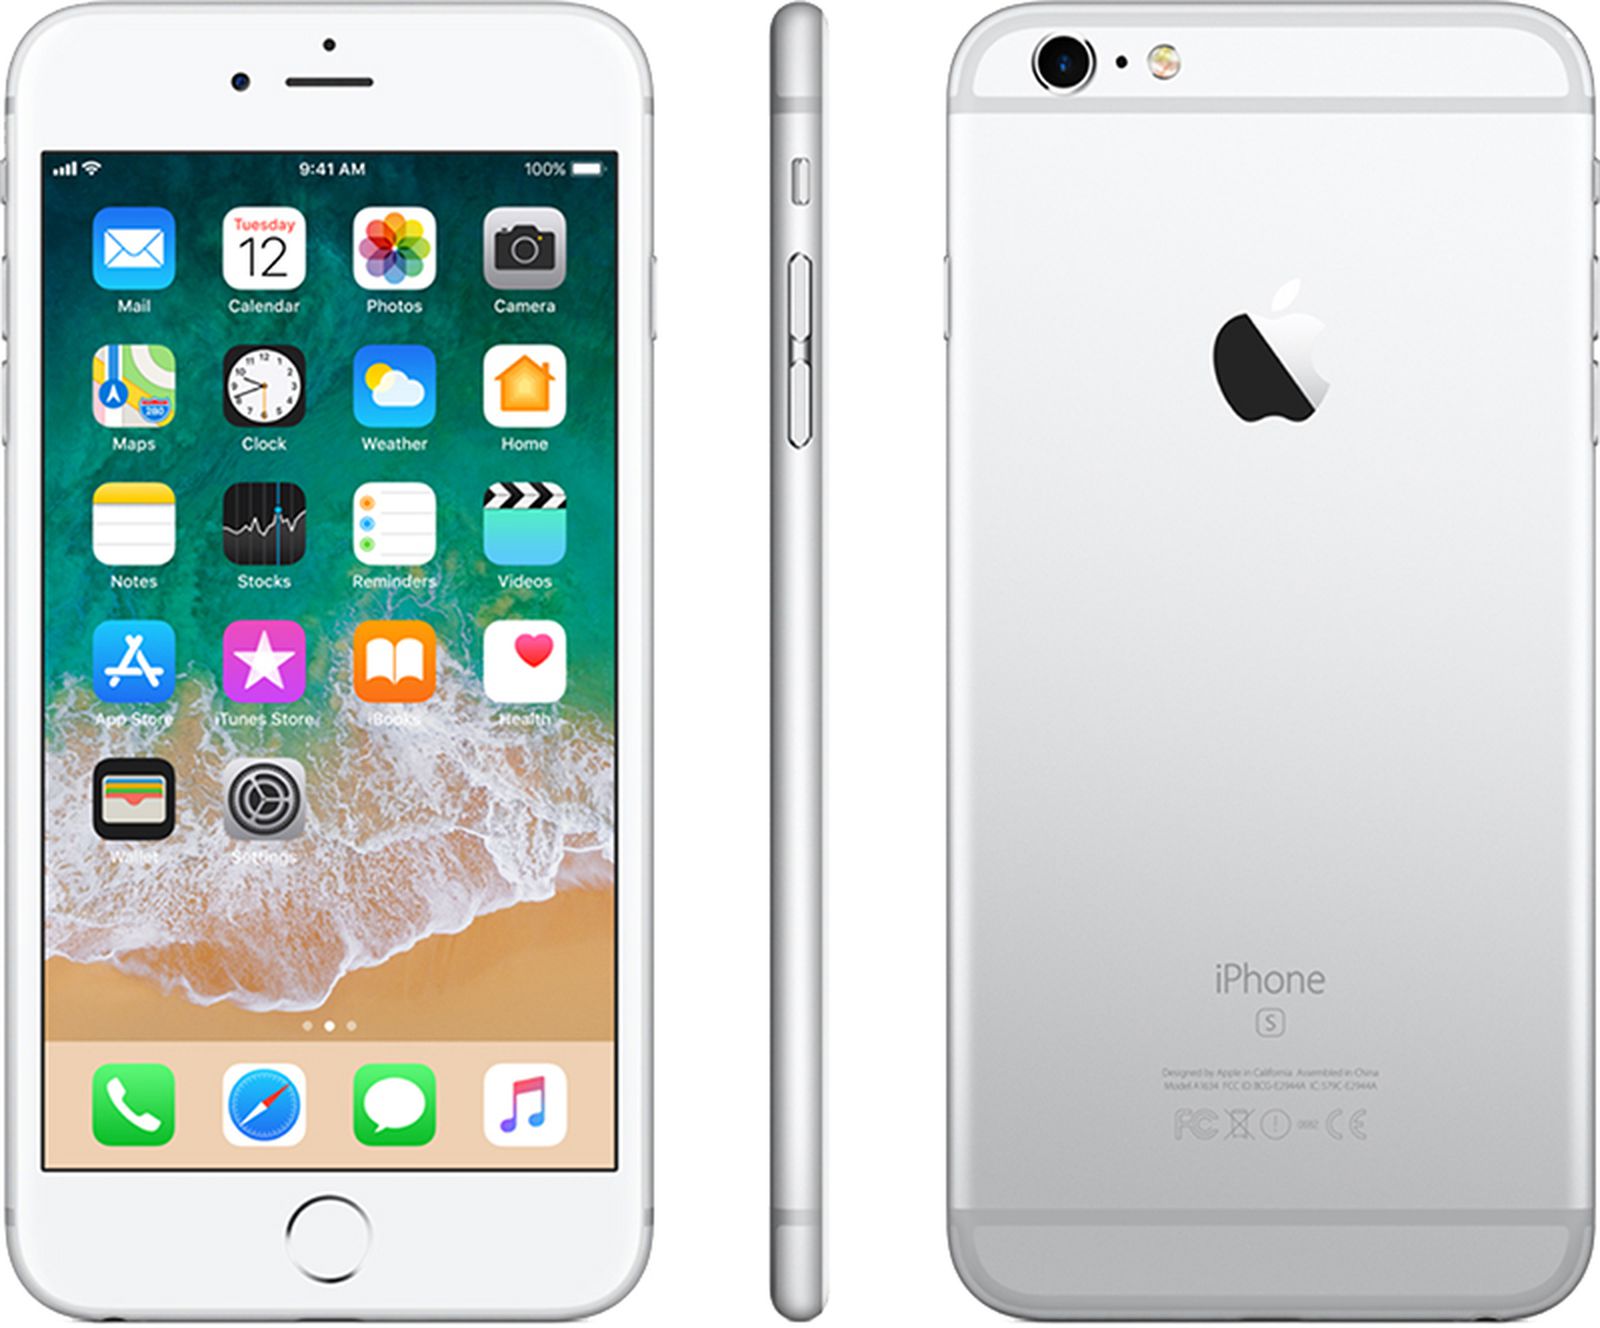 iPhone 6 vs iPhone 6 Plus: The Differences Between The New Apple